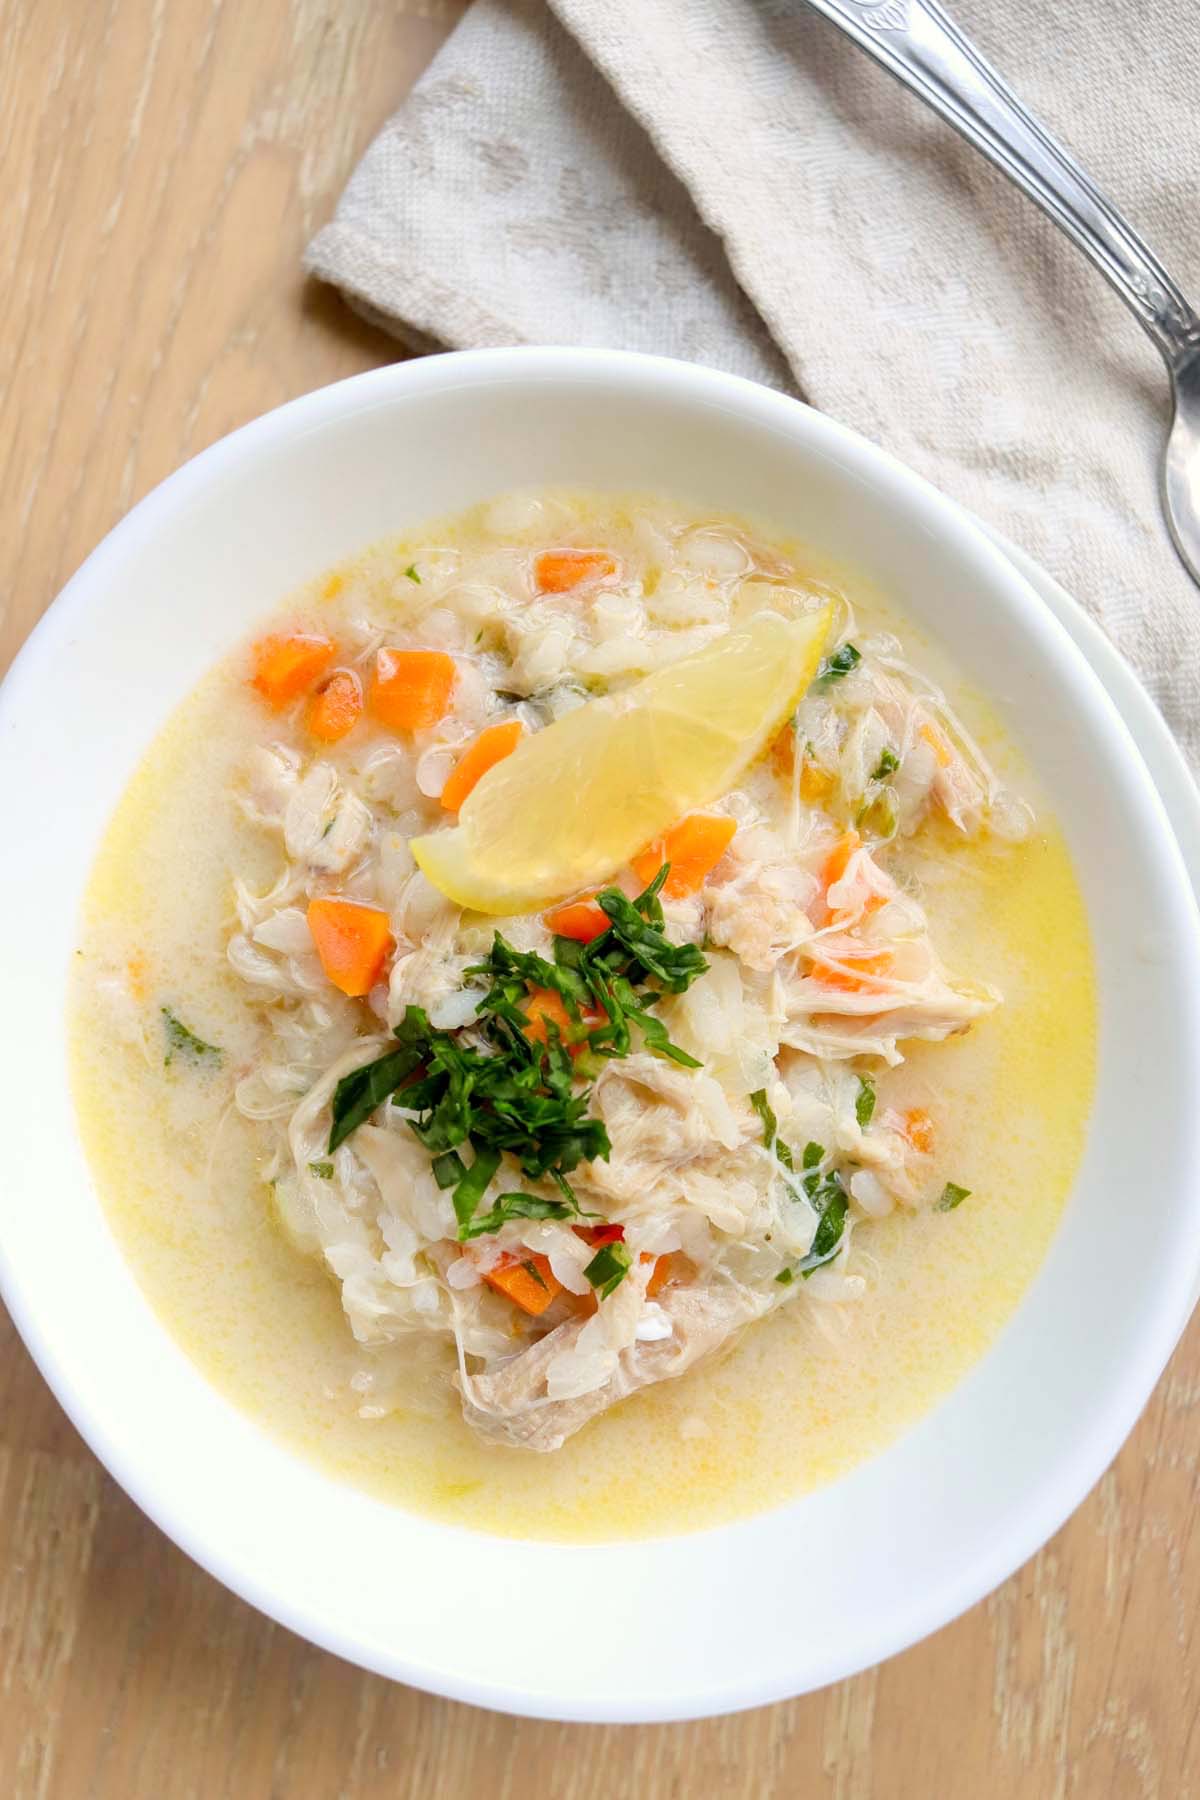 Chicken soup in a bowl topped with a lemon wedge.